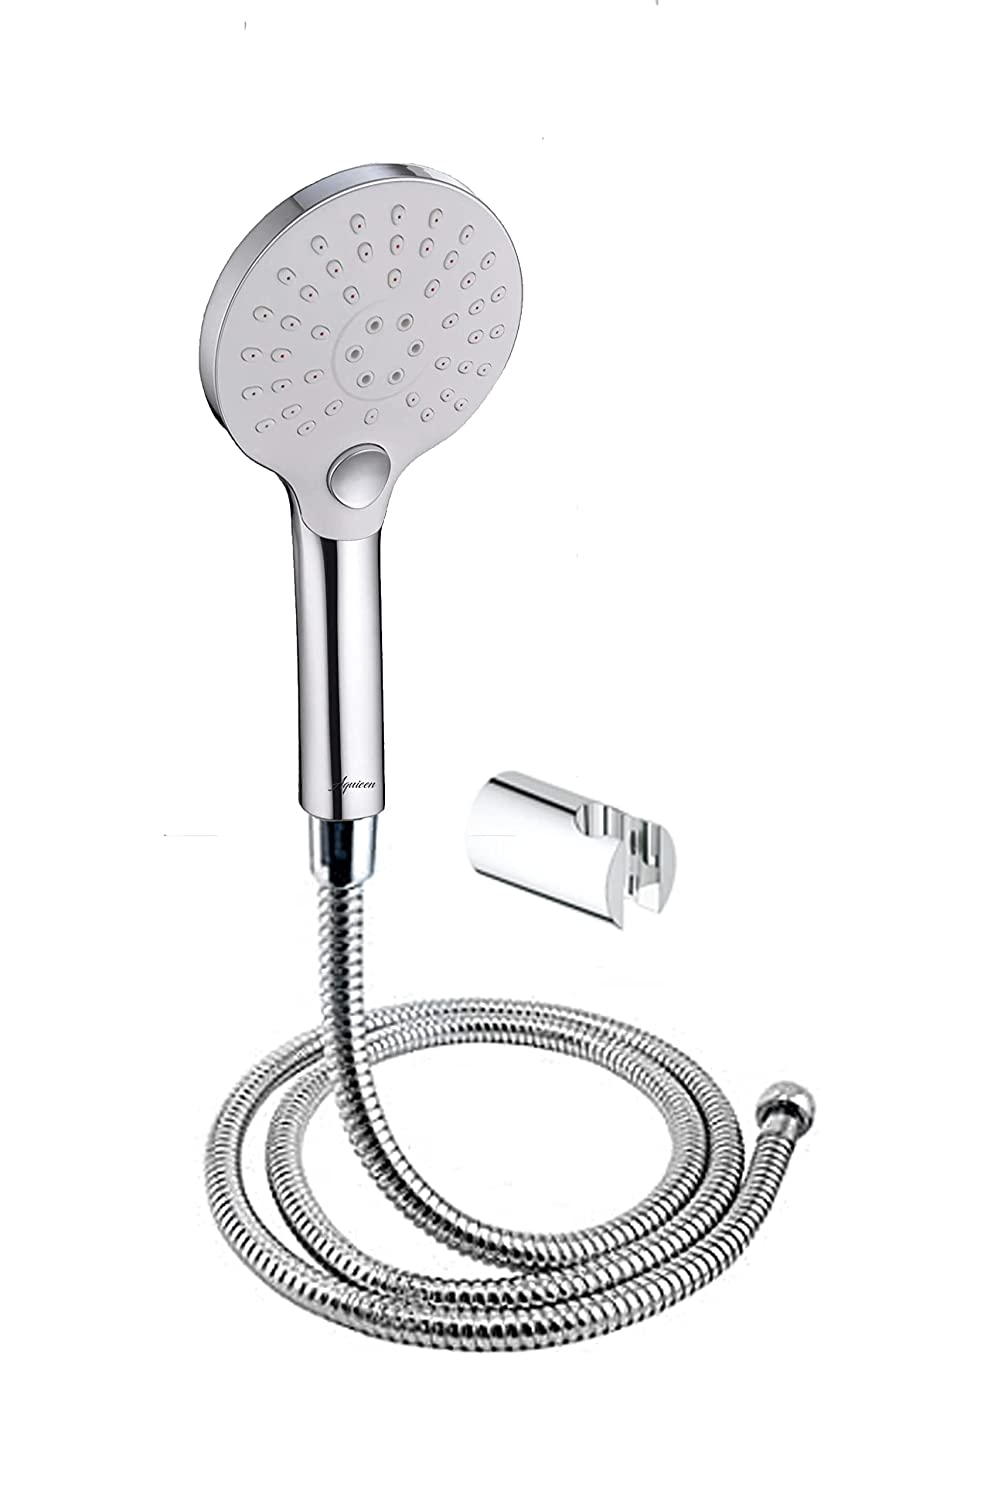 Aquieen 3 Function Auto Clean Hand Shower Set with 1.5 meter Shower Tube & Wall Hook (Self Clean Hand Shower)